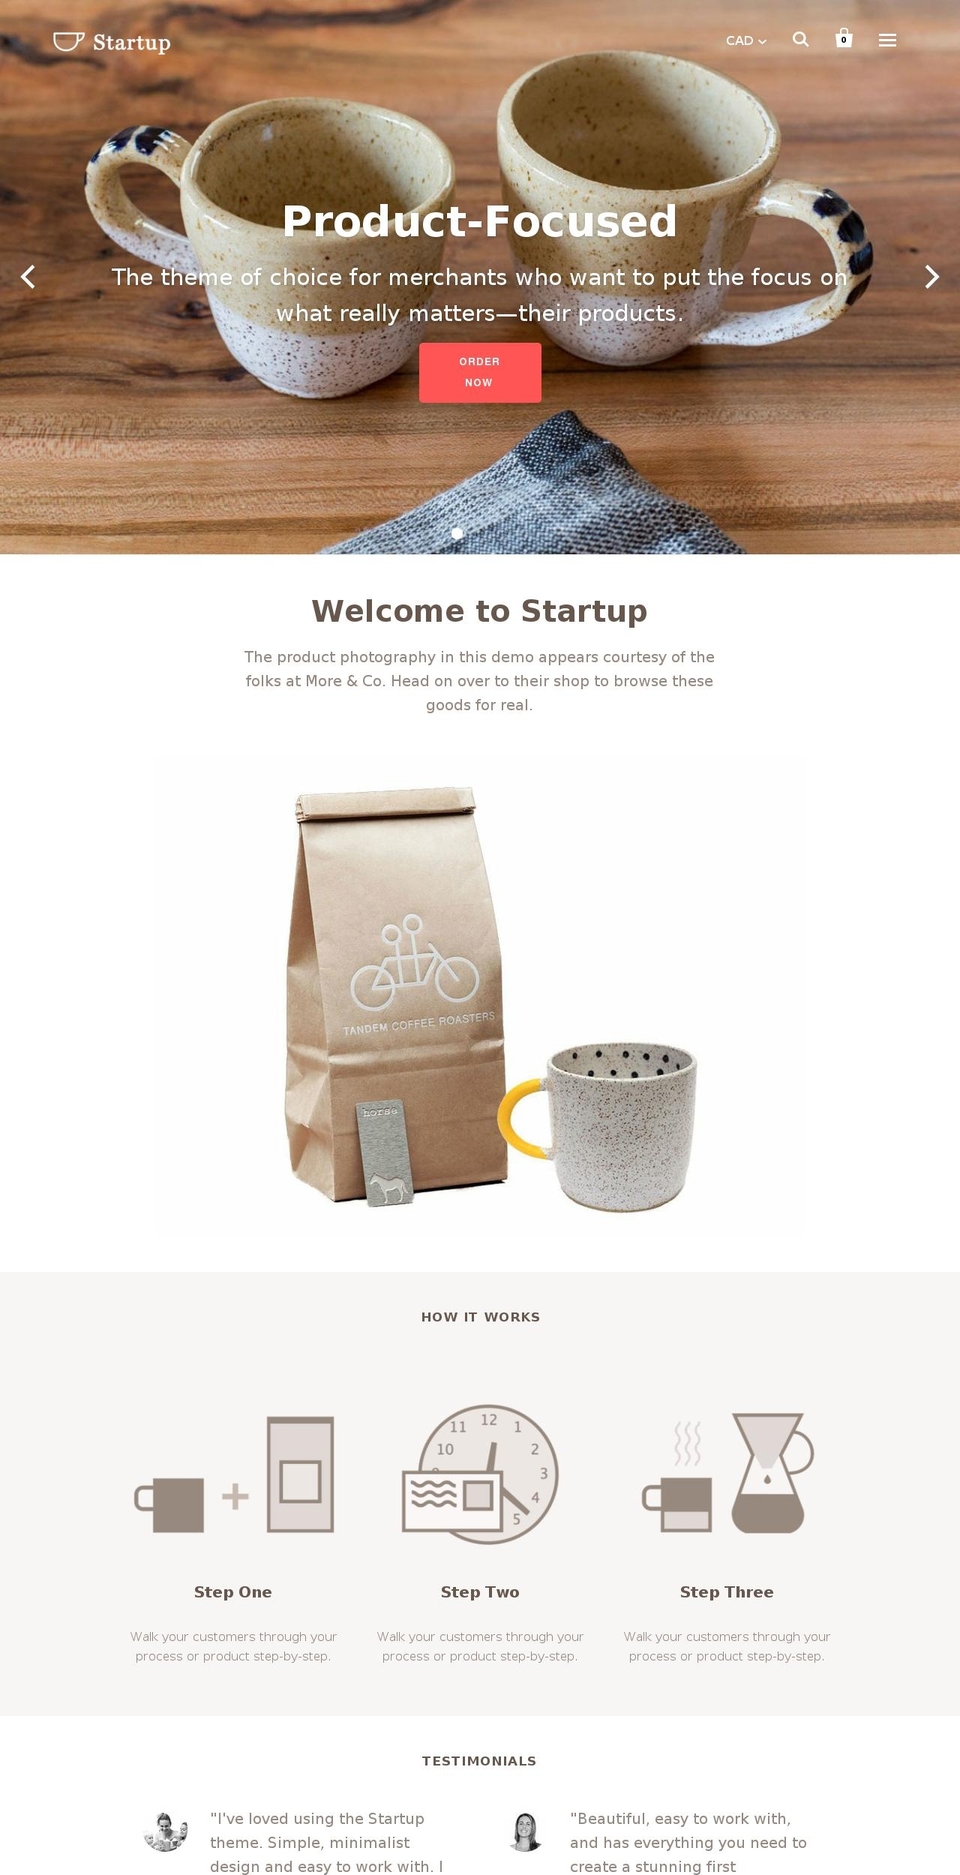 Startup Shopify theme site example startup-theme-home.myshopify.com